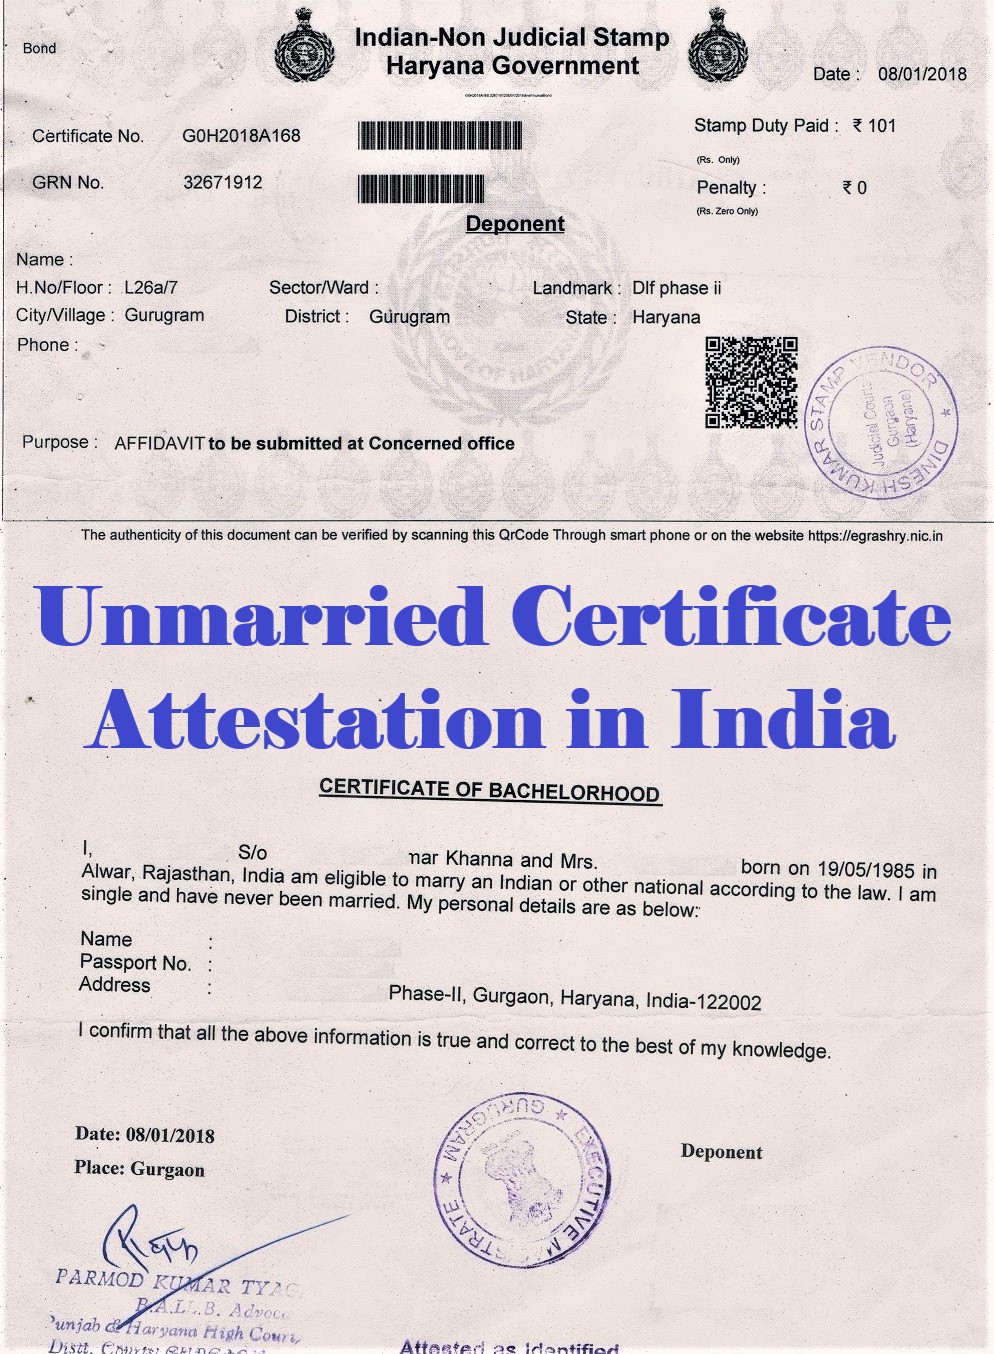 Unmarried Certificate Attestation from Algeria Embassy